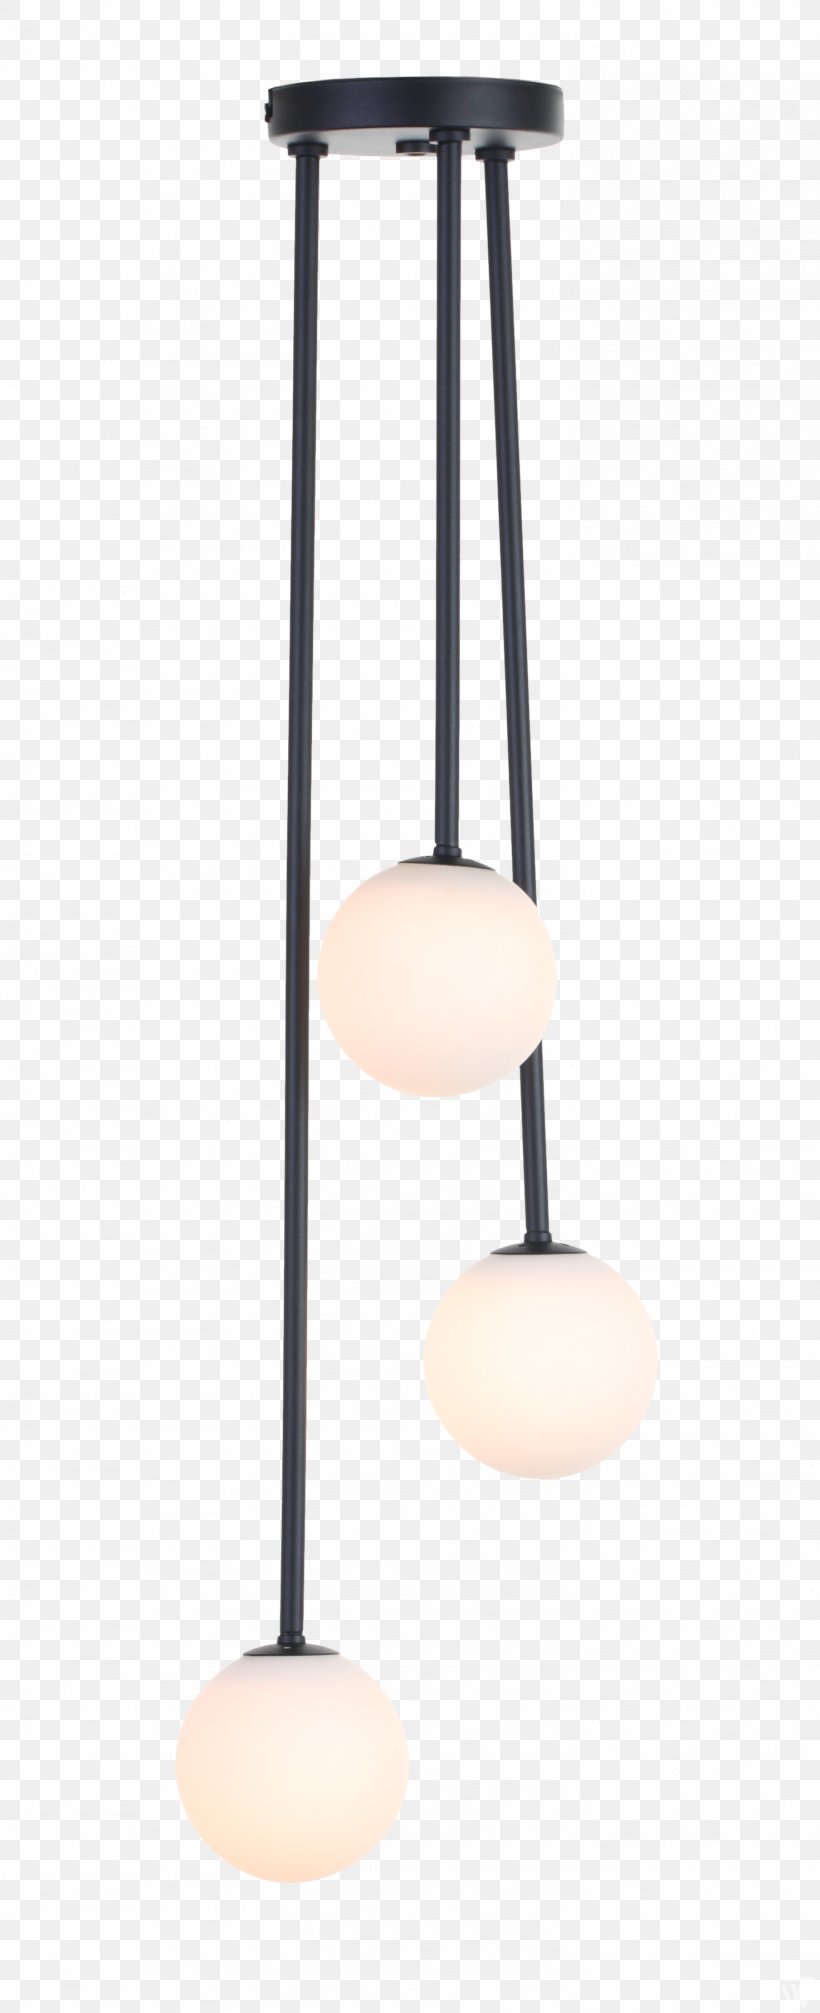 Ceiling Light Fixture, PNG, 1472x3615px, Ceiling, Ceiling Fixture, Lamp, Light Fixture, Lighting Download Free